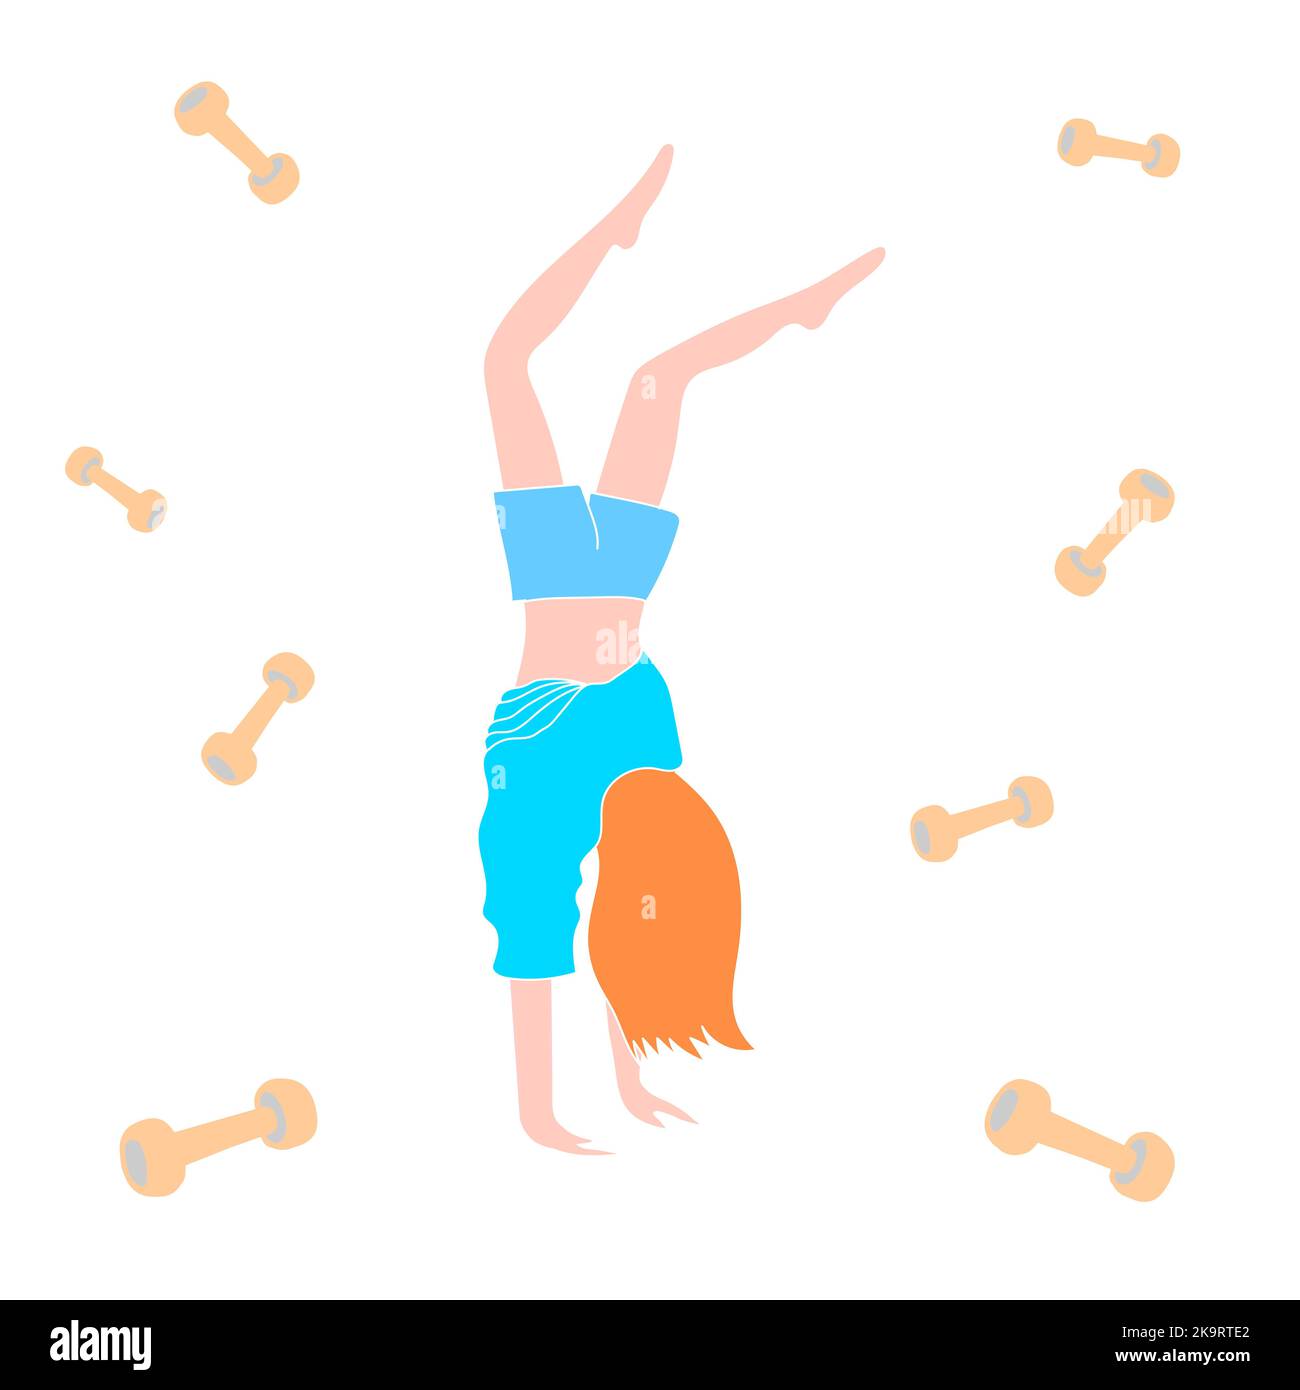 Woman with red hair in blue dress doing her headstands. Sport fitness colorful background with dumbbells. Stock Vector